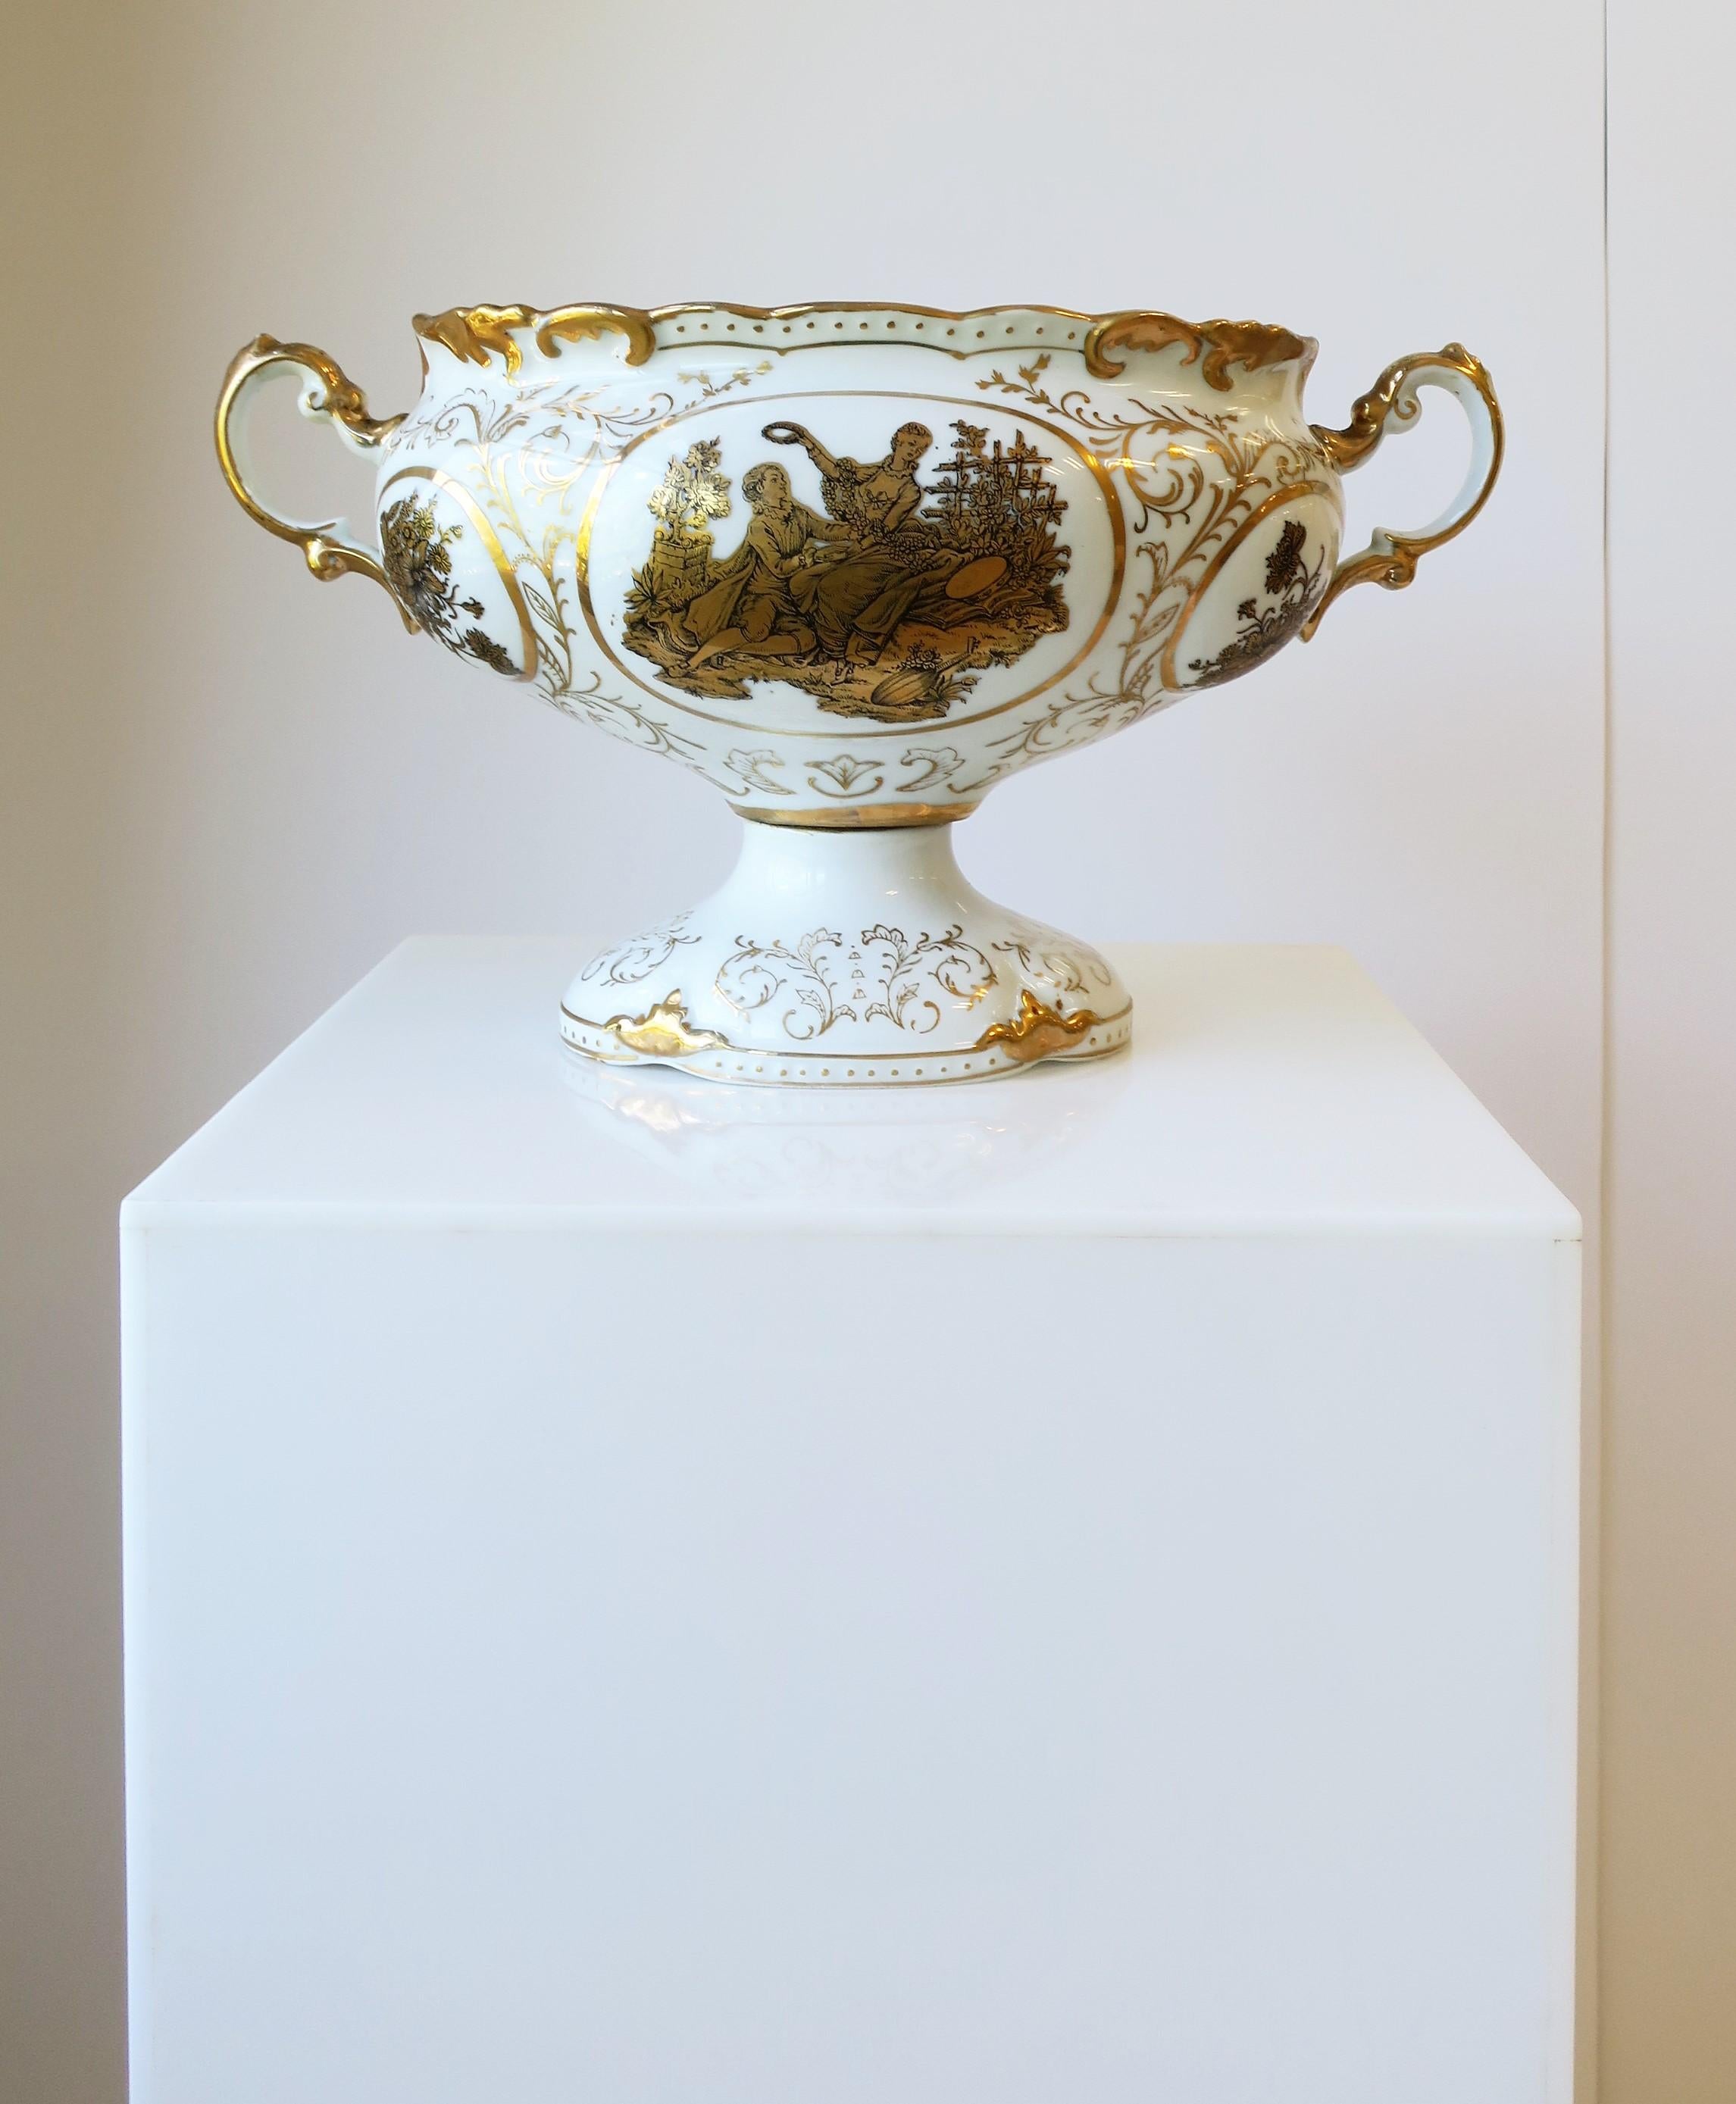 A beautiful, relatively large, Italian white porcelain urn or jardinière with gold Neoclassical design, circa early to mid-20th century, Italy. Beautiful as a standalone piece or to hold fruits, vegetables, or as a jardinière to hold a